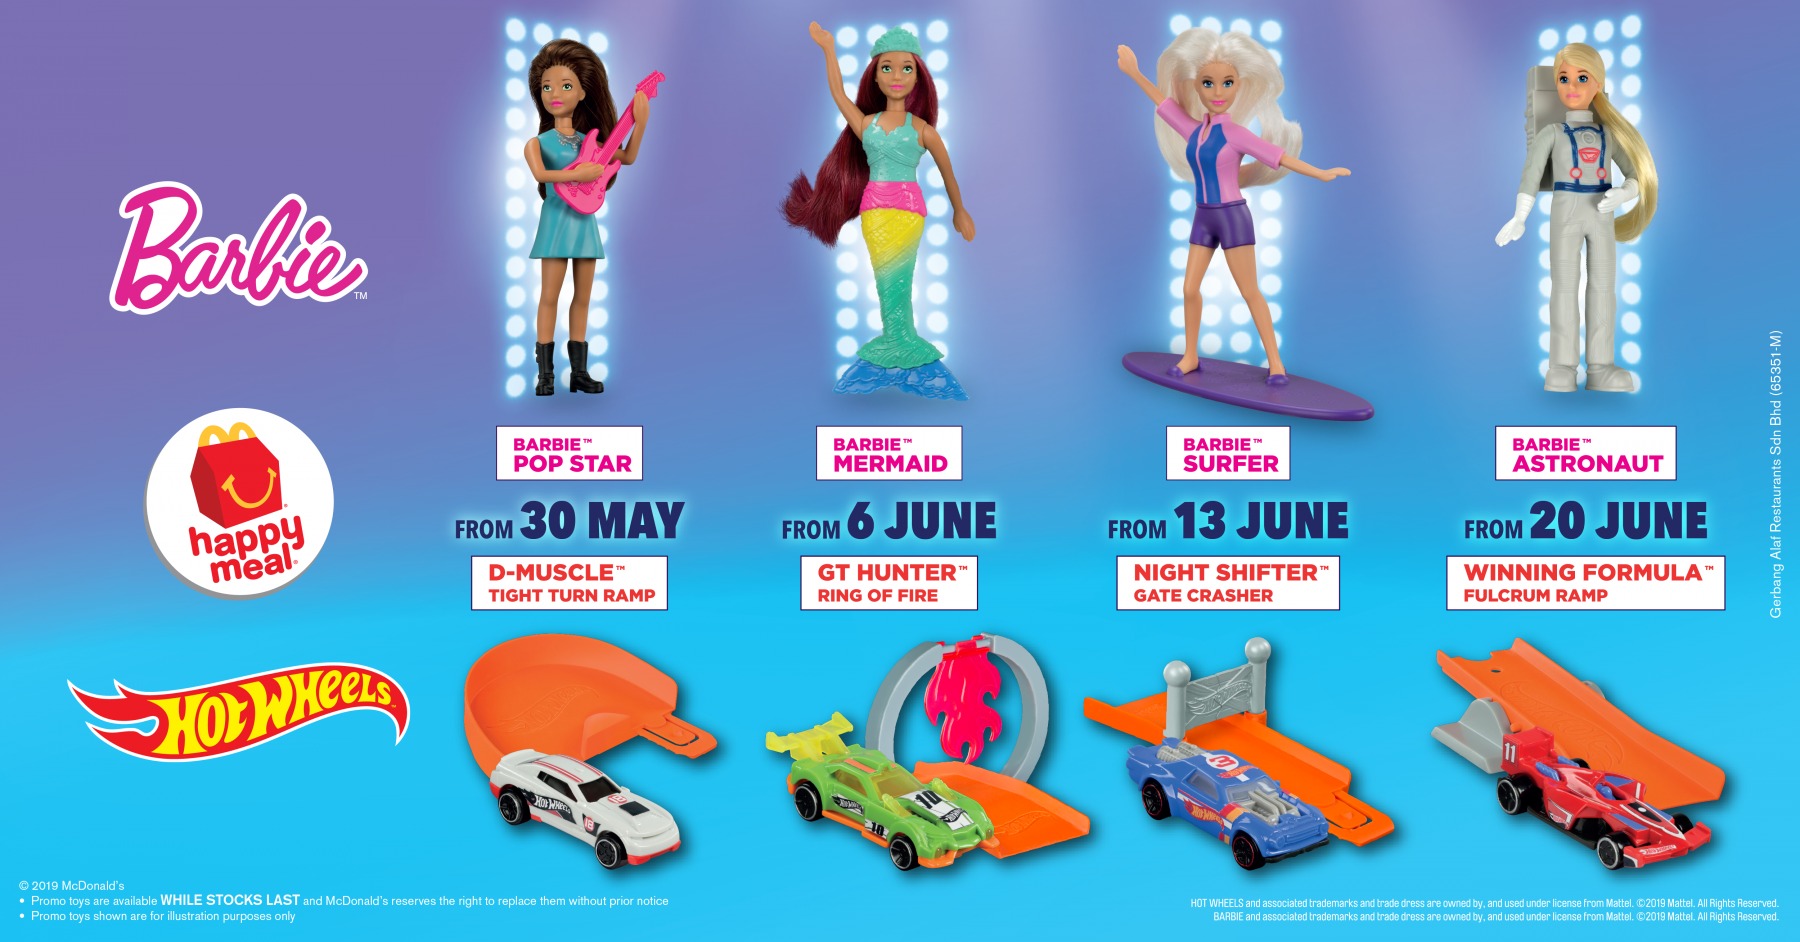 Happy Meal Toys Featuring Barbie & Hot Wheels Now Available In McDonald